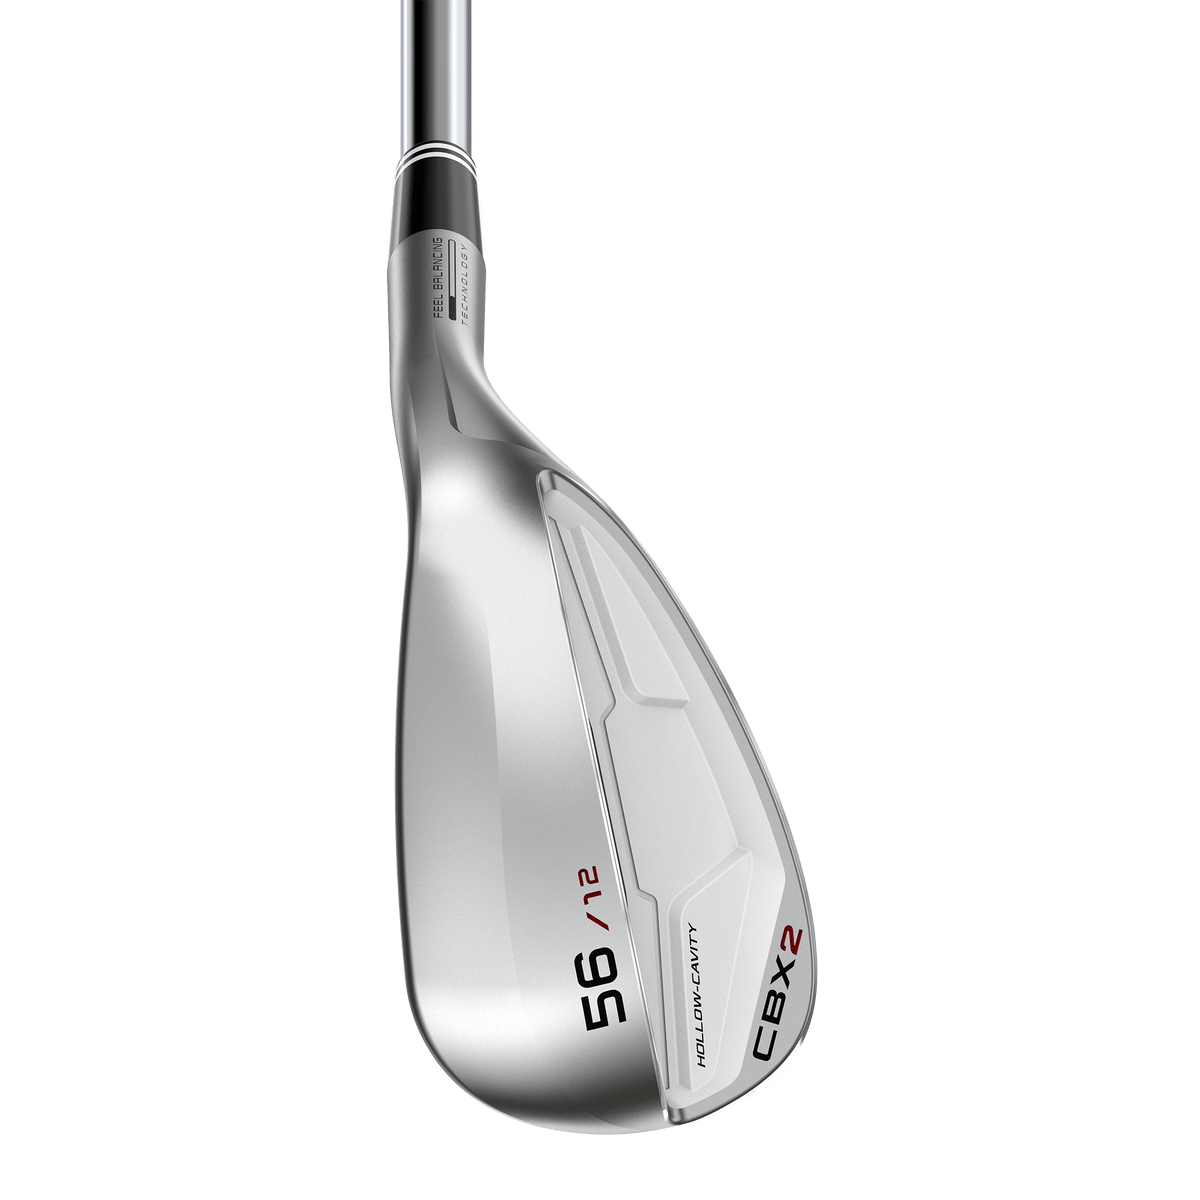 Cleveland Golf CBX2 Wedge · Right Handed · Steel · 56° · 12 · Silver